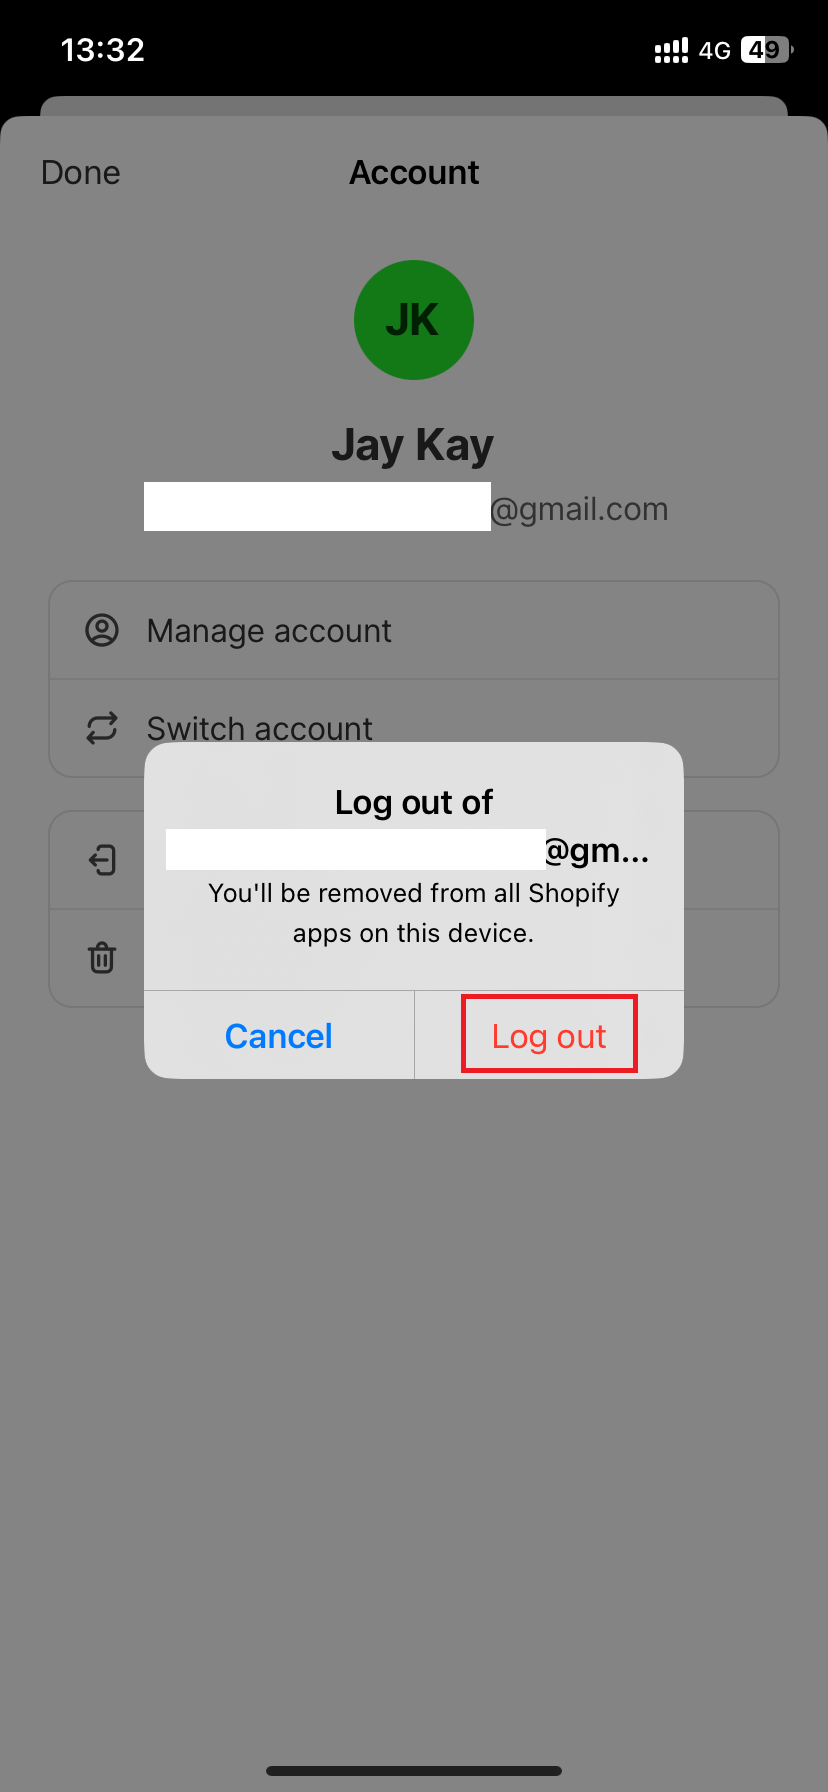 confirm by choosing “Log out”